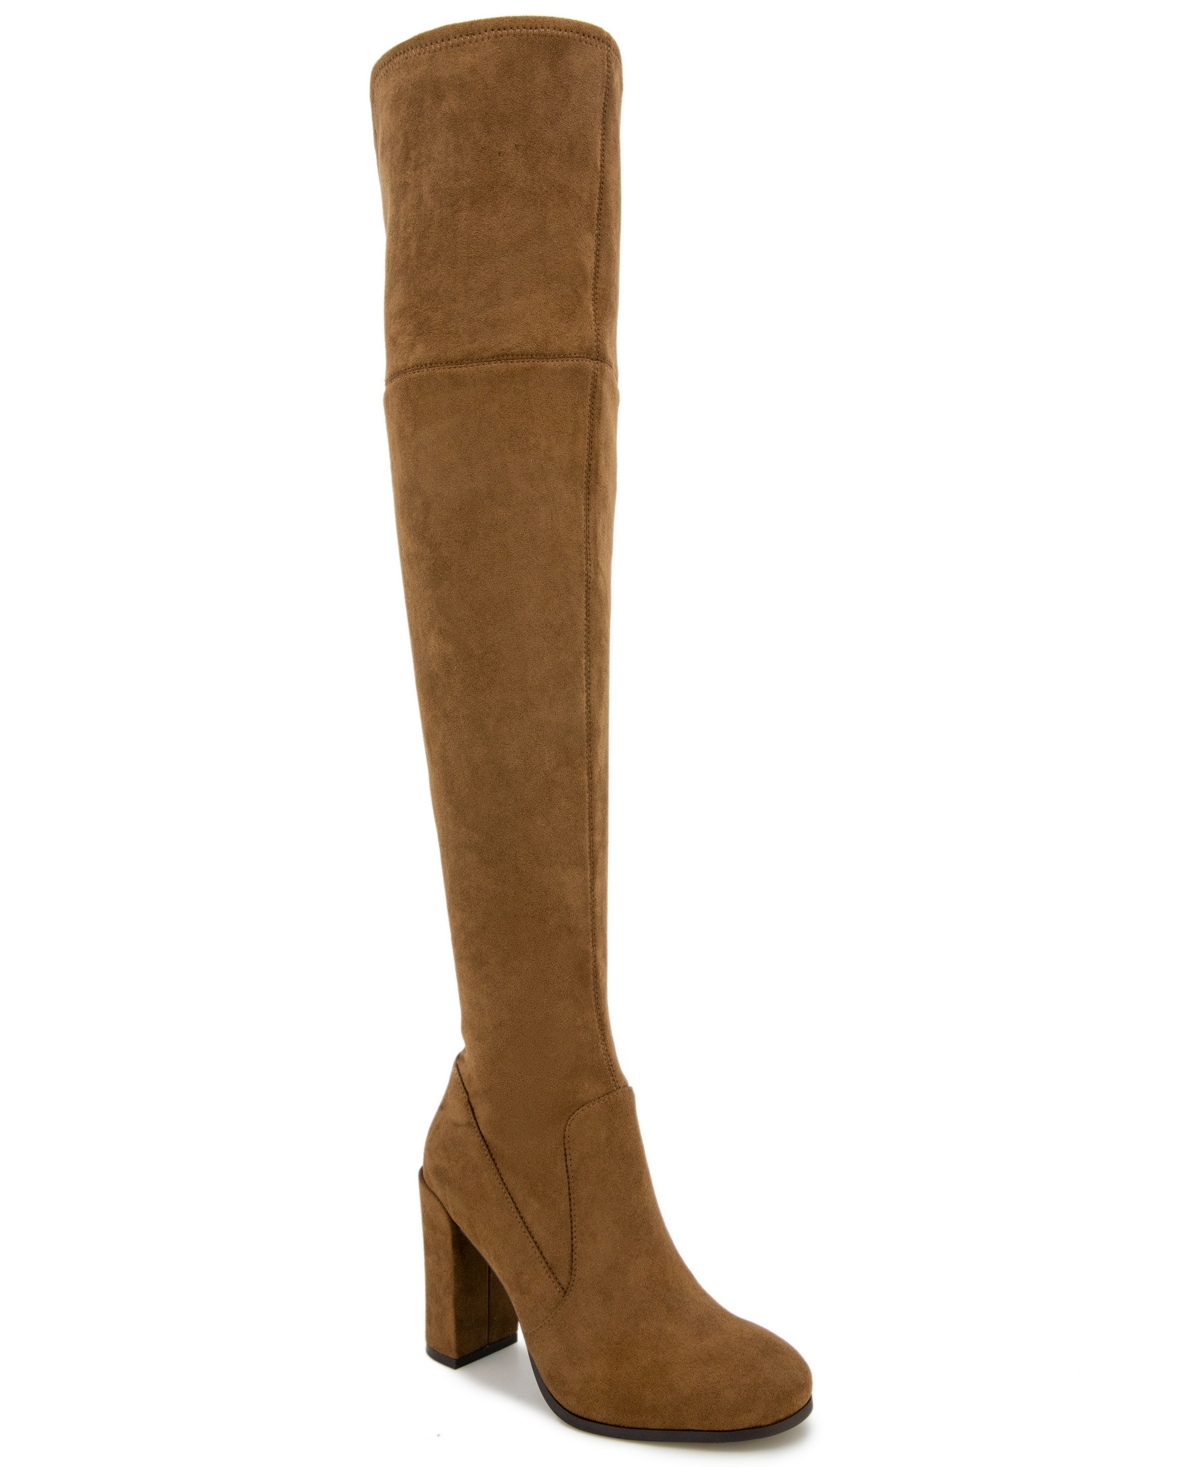 Women's Justin Over the Knee Boots - Mushroom